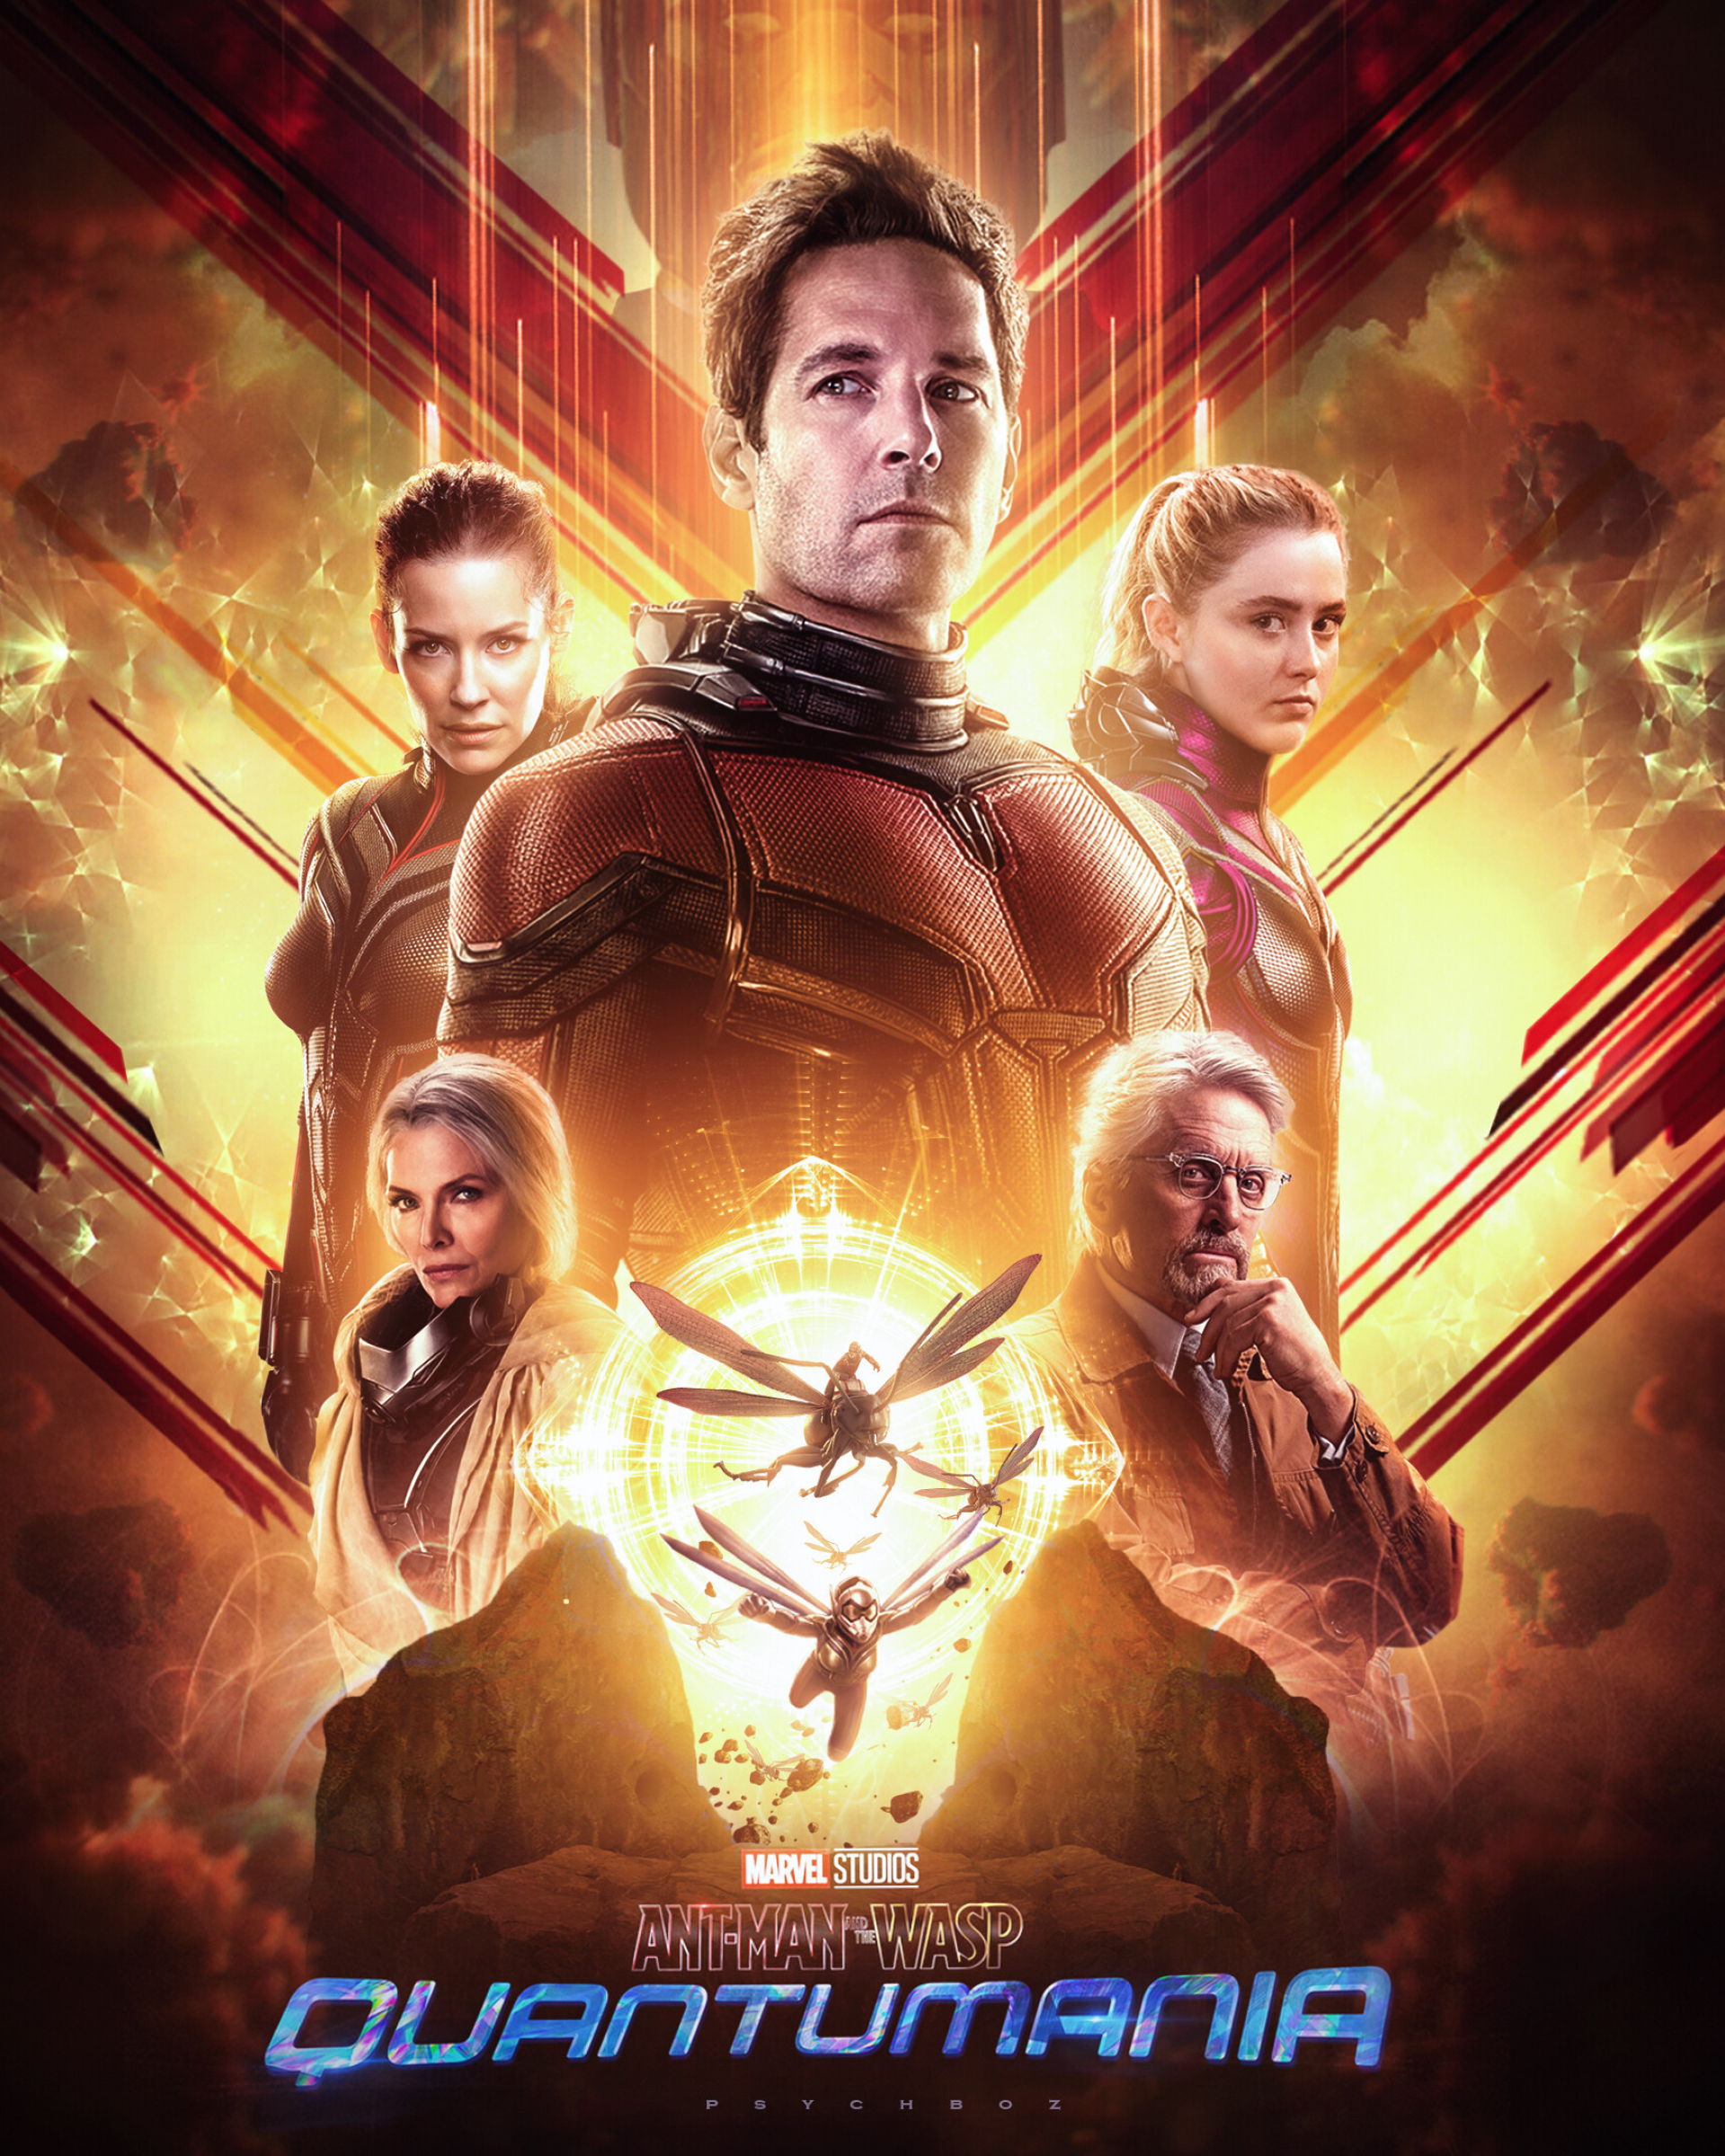 Ant-Man and the Wasp: Quantumania: The third installment in Marvel's Ant-Man trilogy, February 17, 2023. 1920x2400 HD Wallpaper.